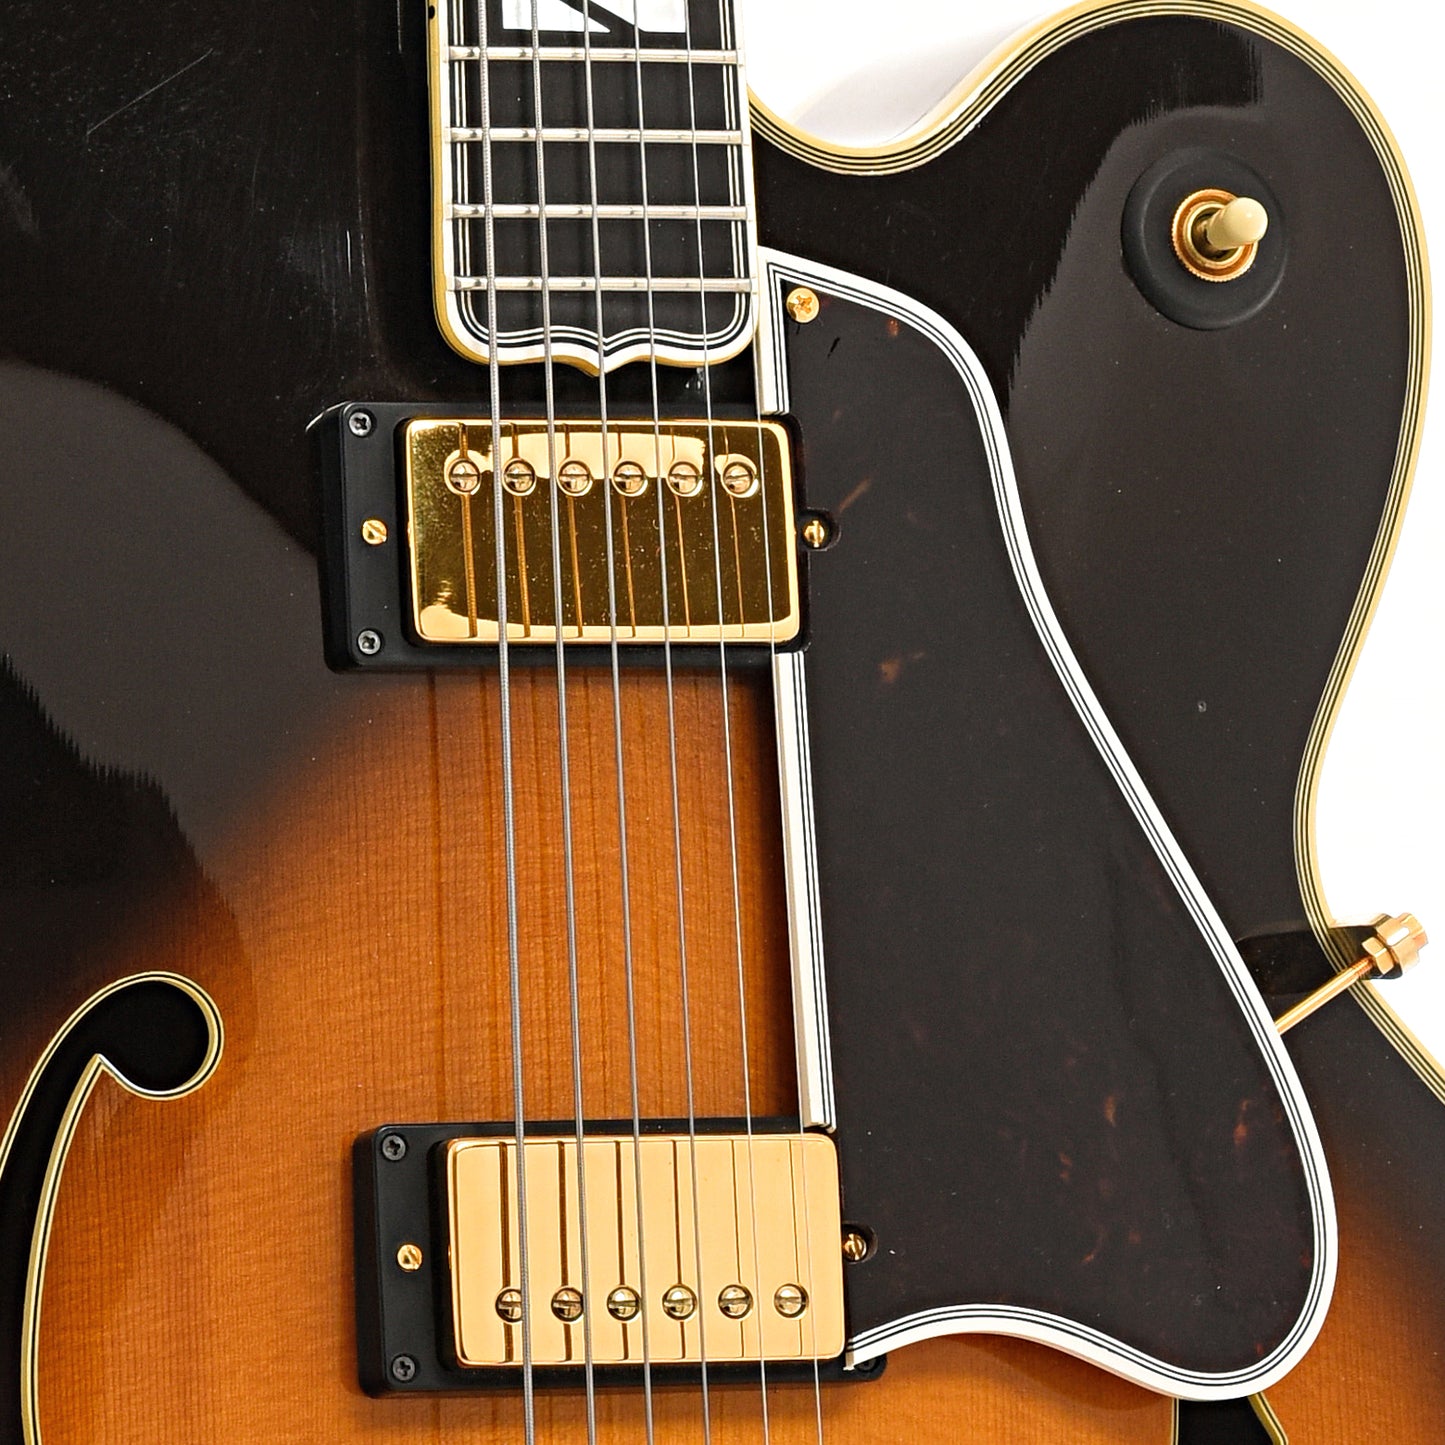 Pickups and pickguard of Gibson Super 400 CES Hollow Body